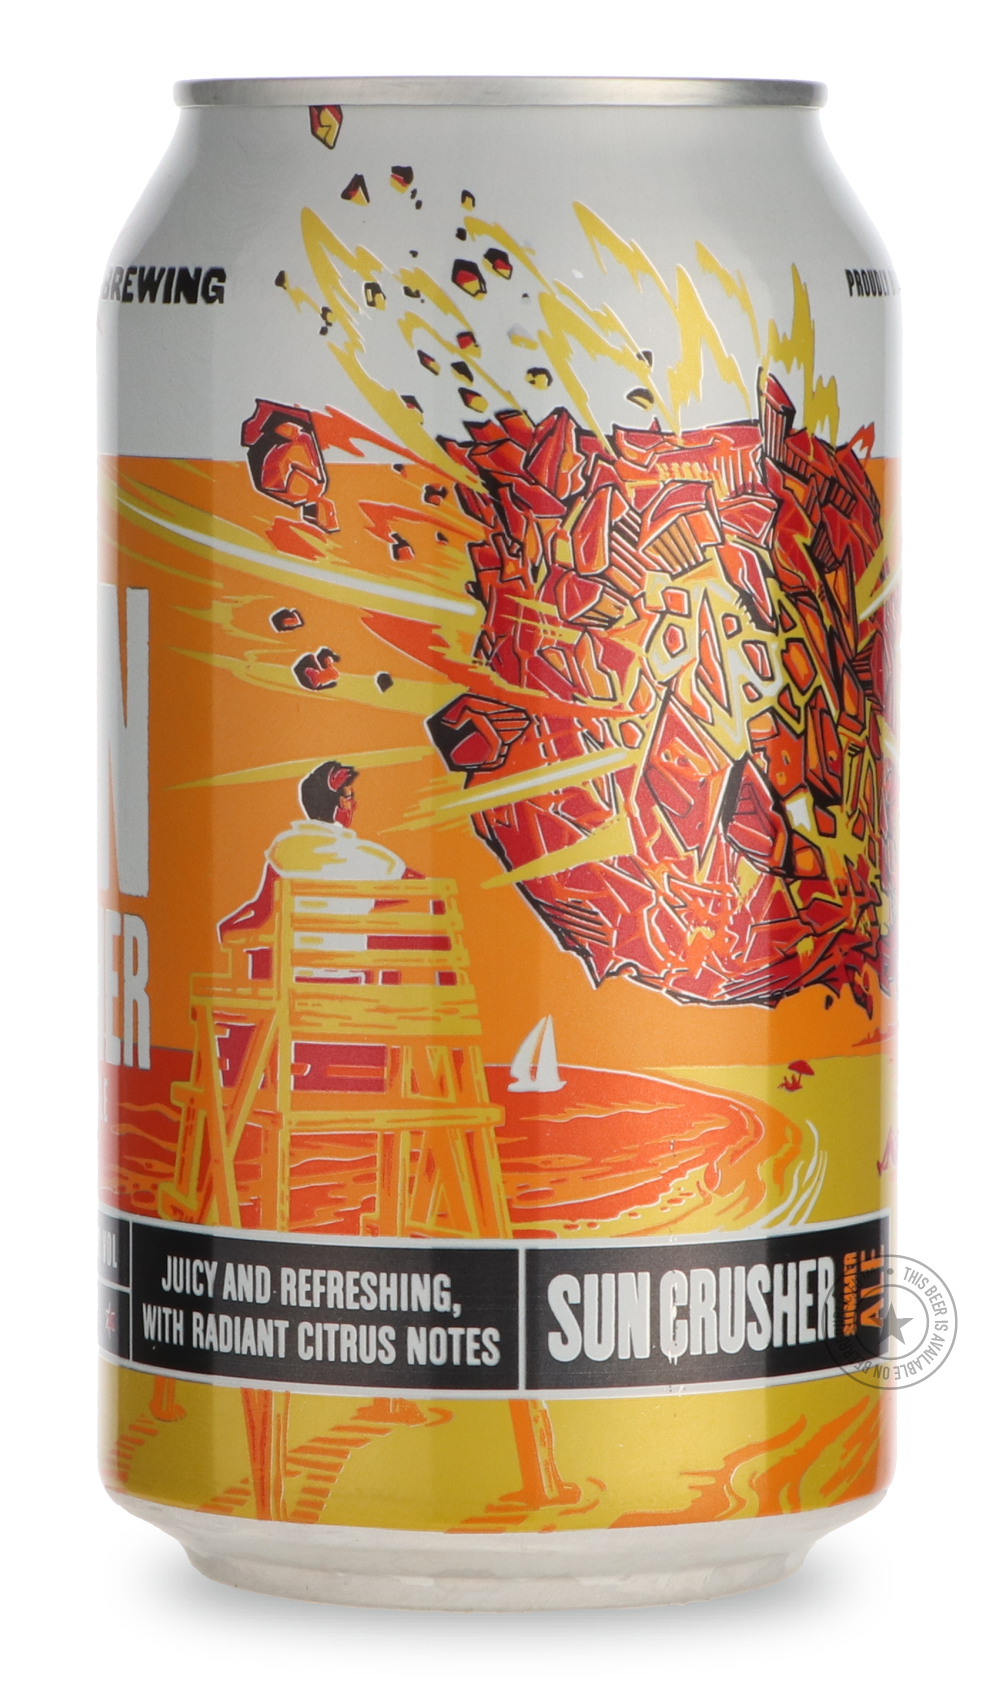 -Revolution- Sun Crusher-Pale- Only @ Beer Republic - The best online beer store for American & Canadian craft beer - Buy beer online from the USA and Canada - Bier online kopen - Amerikaans bier kopen - Craft beer store - Craft beer kopen - Amerikanisch bier kaufen - Bier online kaufen - Acheter biere online - IPA - Stout - Porter - New England IPA - Hazy IPA - Imperial Stout - Barrel Aged - Barrel Aged Imperial Stout - Brown - Dark beer - Blond - Blonde - Pilsner - Lager - Wheat - Weizen - Amber - Barley 